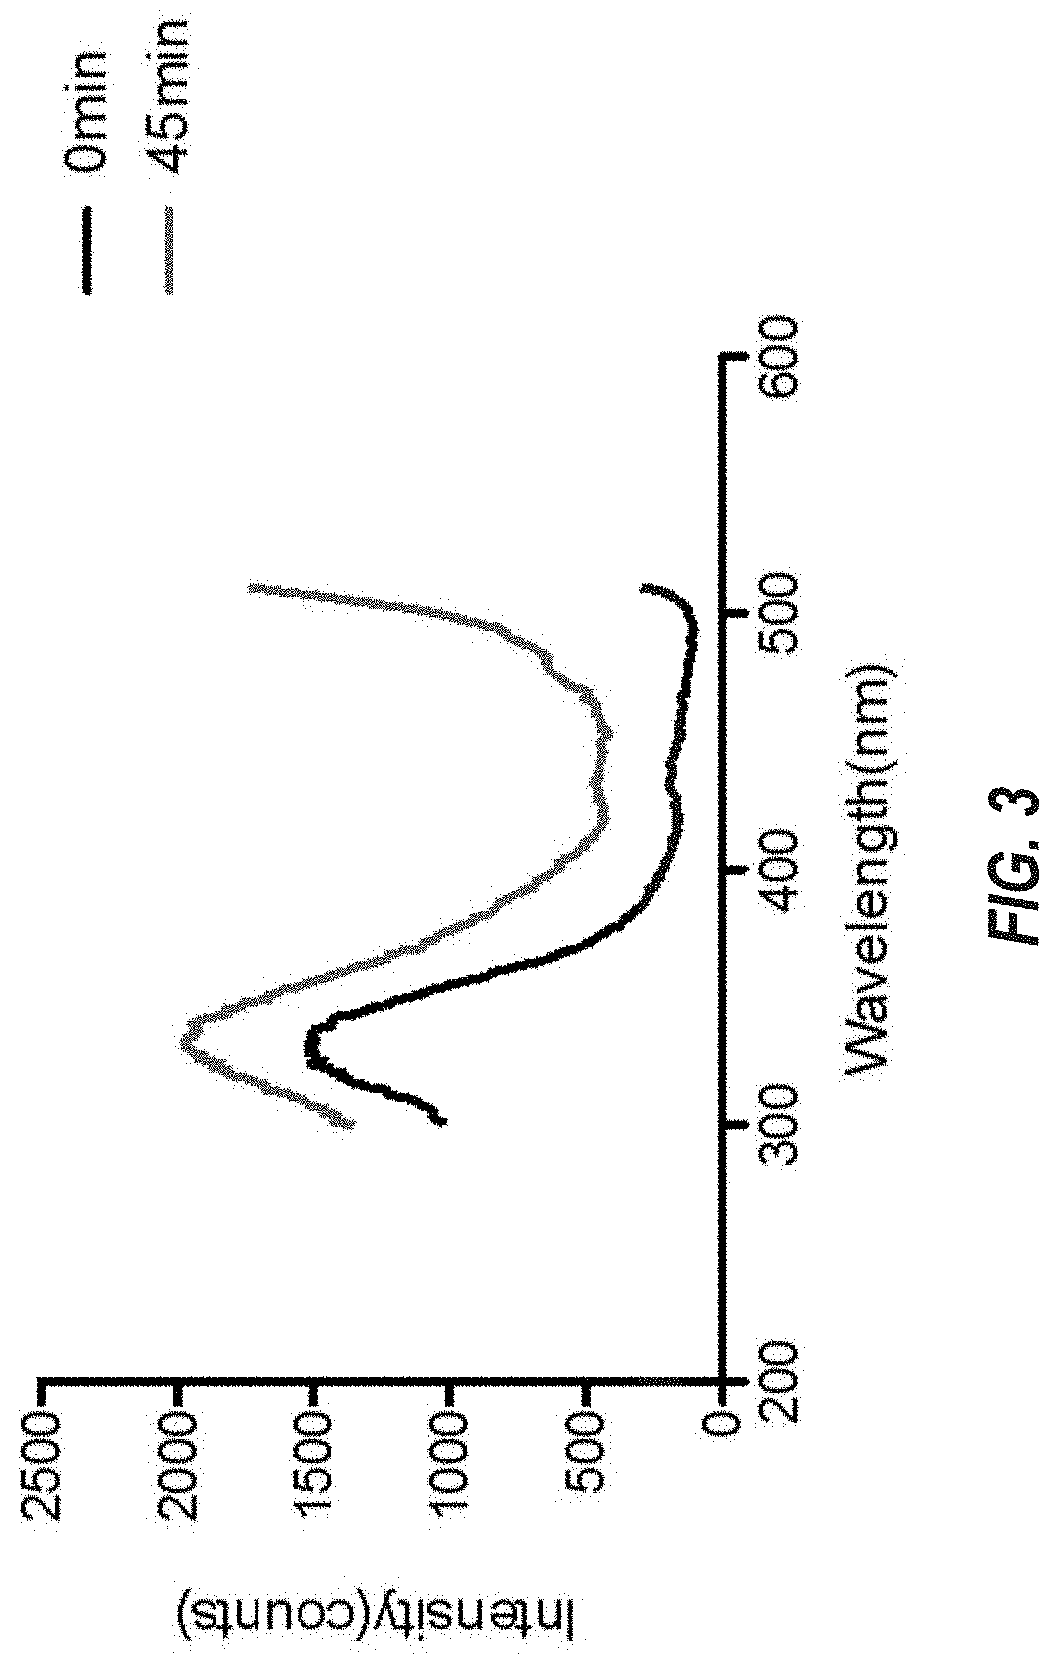 Systems and methods for detecting tissue ischemia and evaluating organ function using serum luminescence